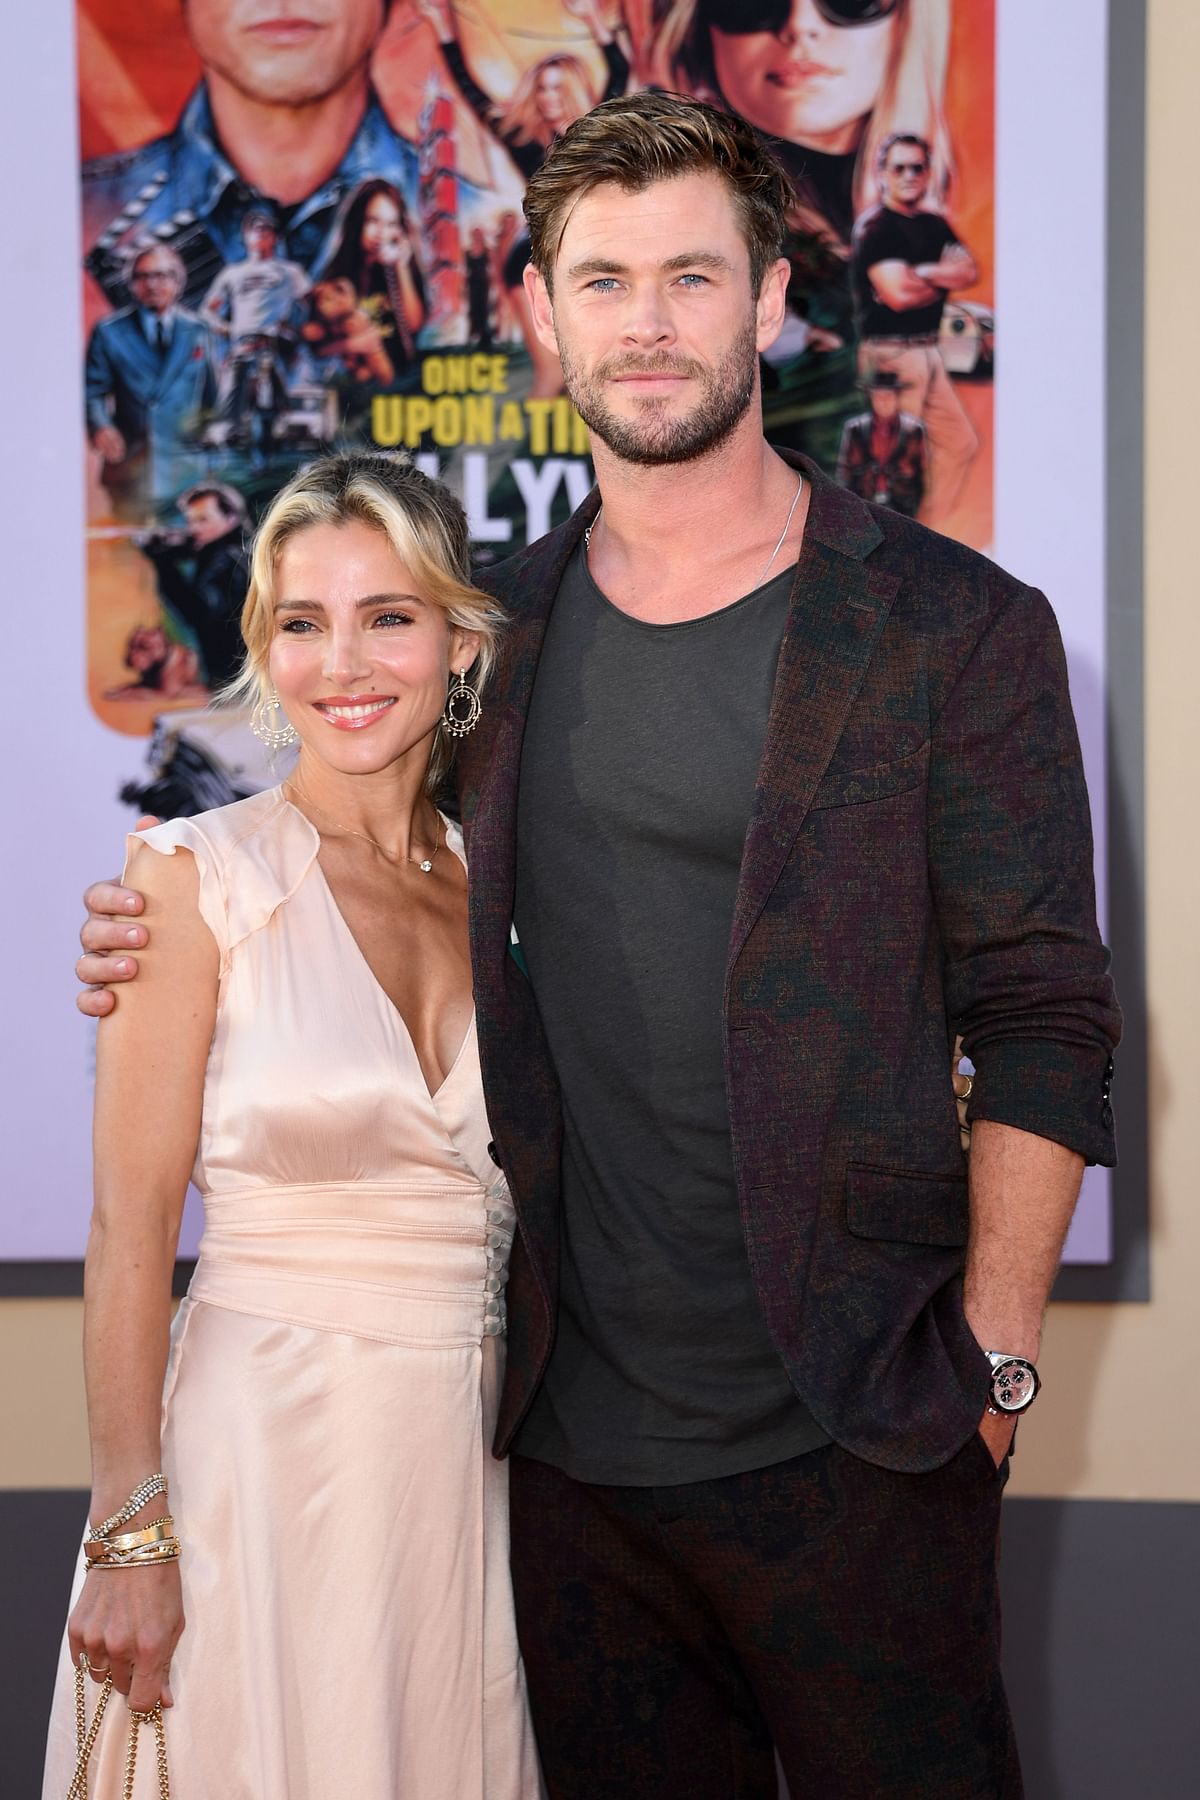 Australian actor Chris Hemsworth and his wife Spanish model Elsa Pataky arrive for the premiere of Sony Pictures` `Once Upon a Time... in Hollywood` at the TCL Chinese Theatre in Hollywood, California on 22 July 2019 in Hollywood, California. Photo: AFP